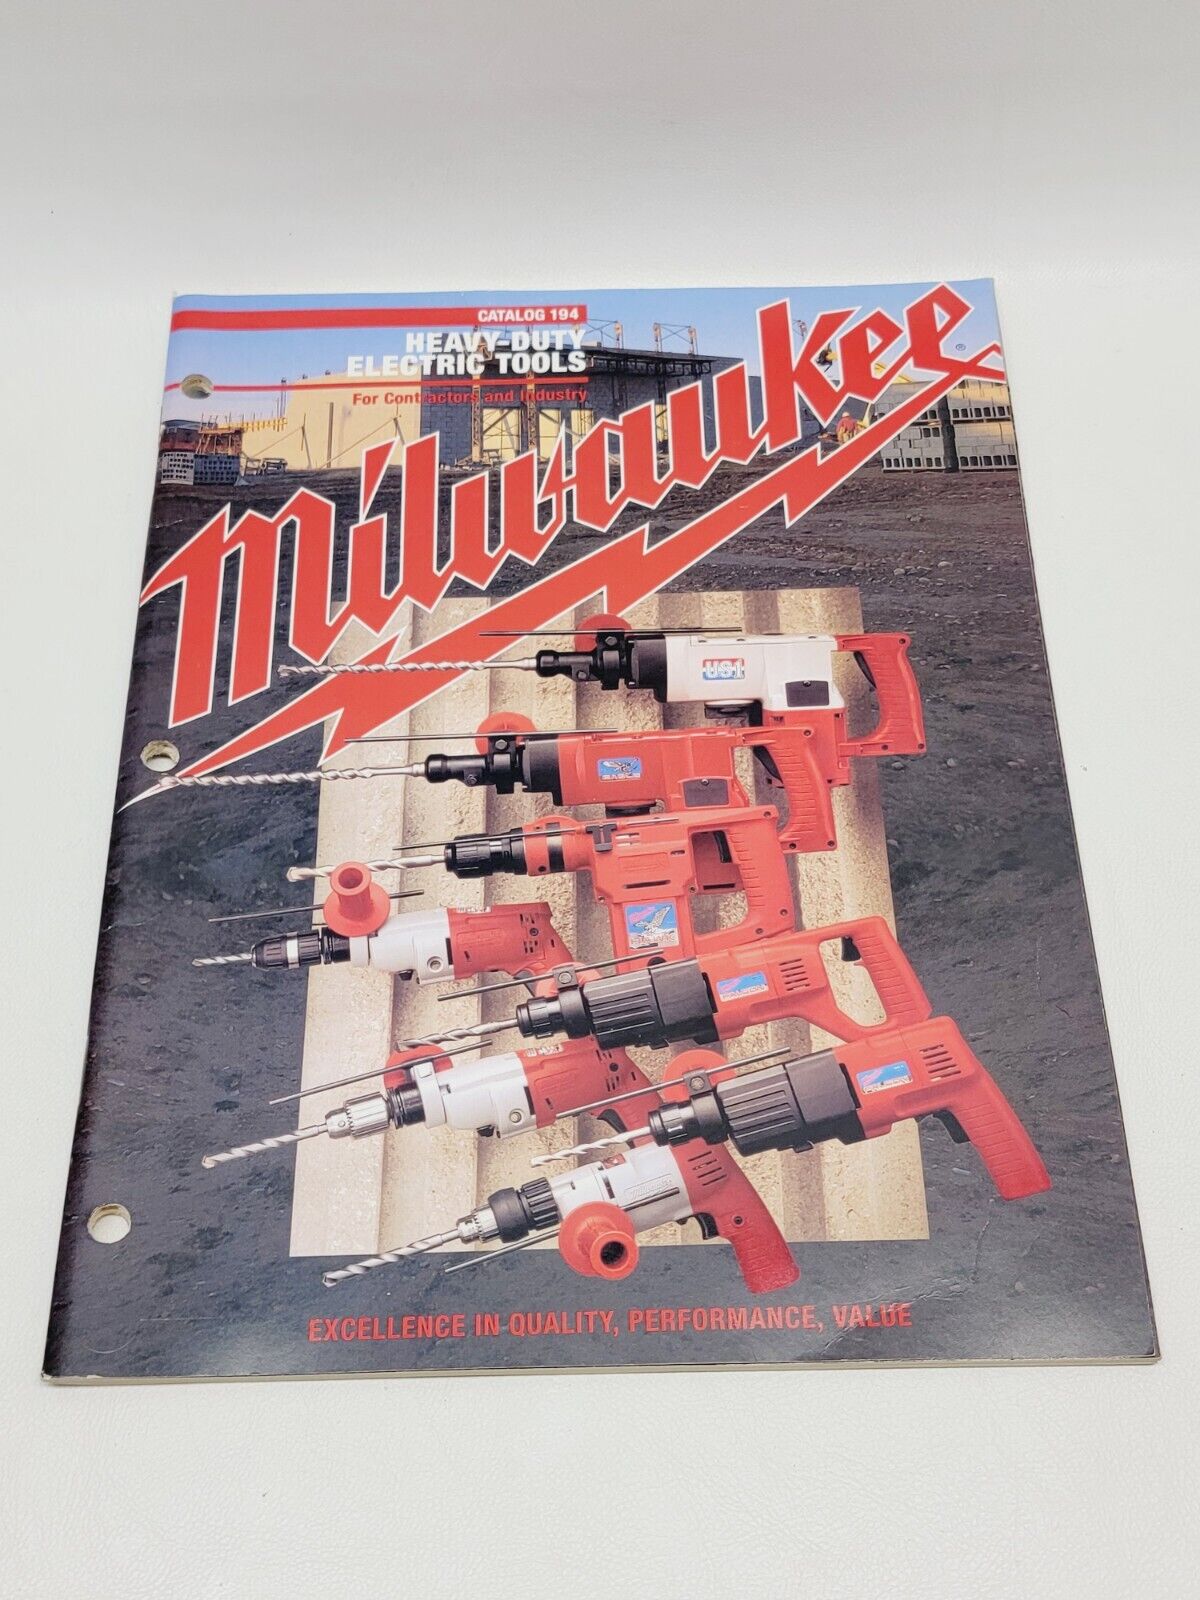 Vtg Milwaukee Heavy-Duty Electric Tools for Contractors and Industry Catalog 194